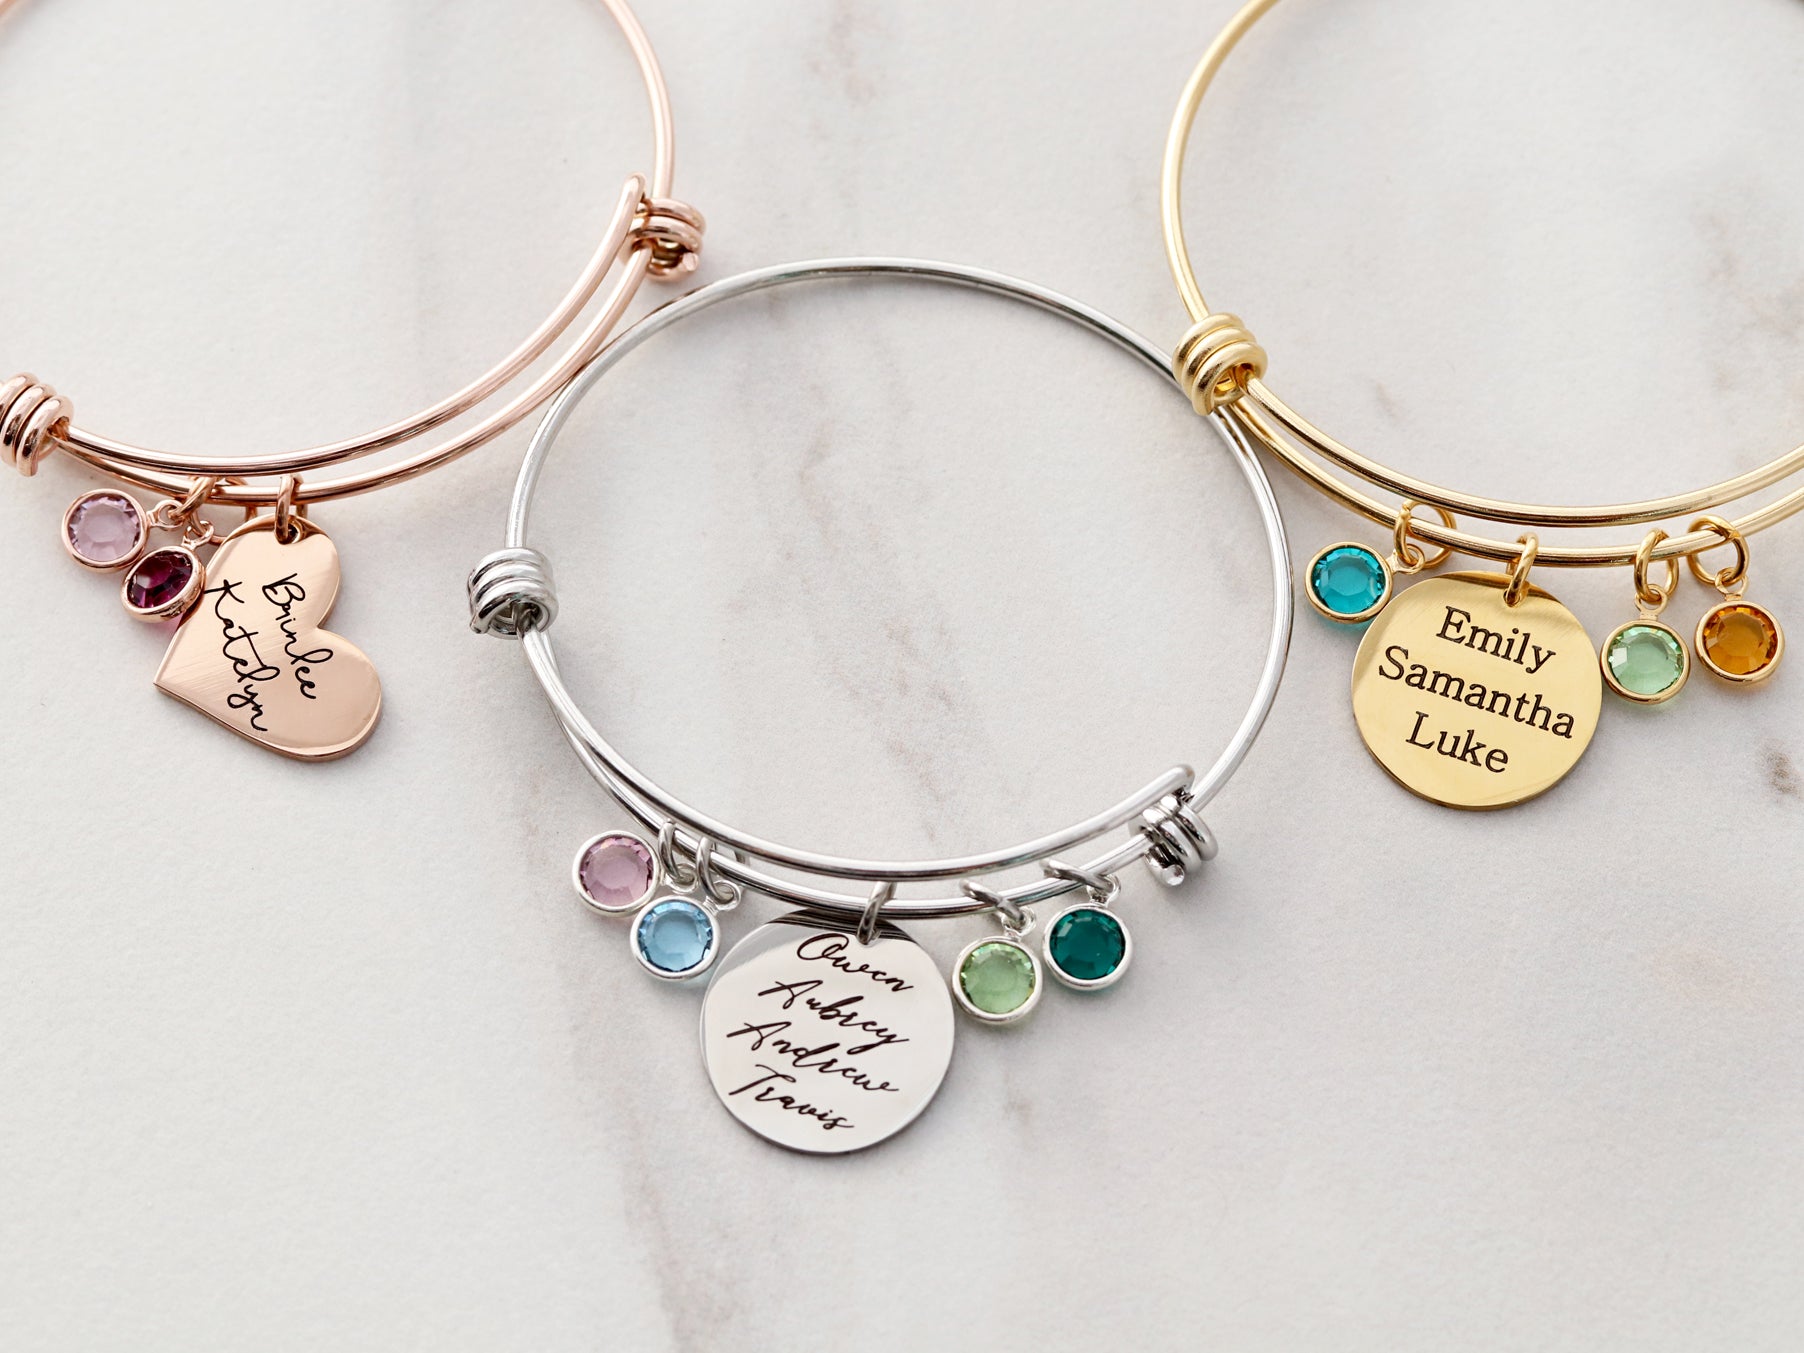 Thelma and Louise Bracelet  Birthstone charms, Womens jewelry